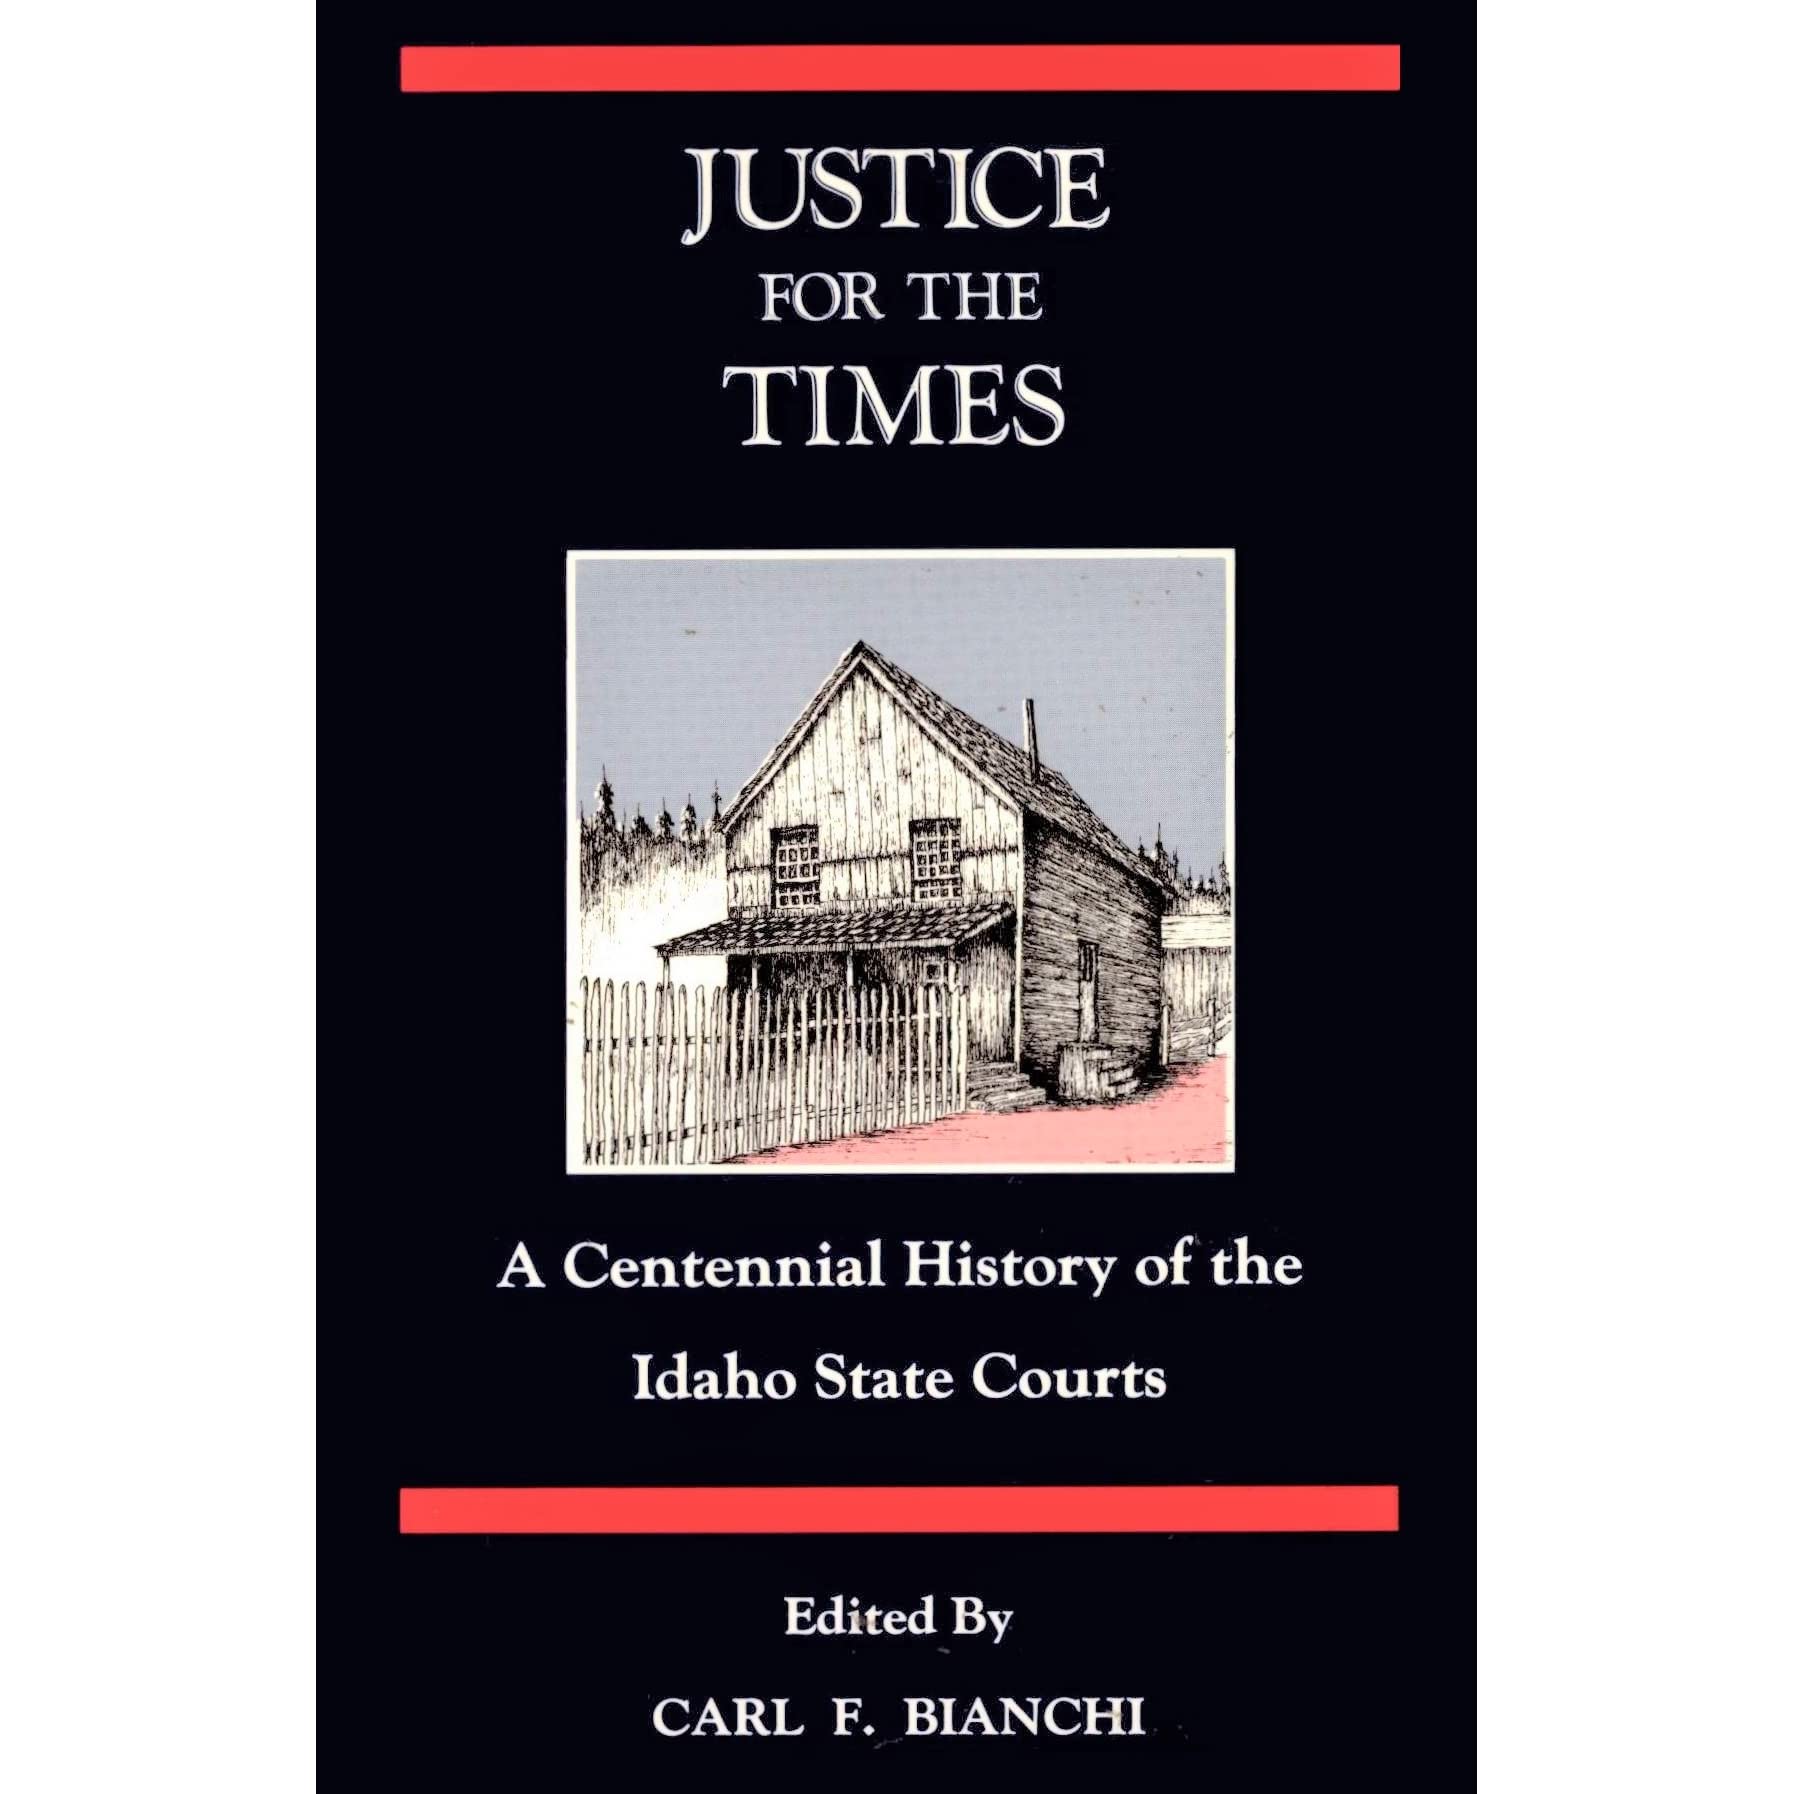 Justice for the times: A centennial history of the Idaho state courts (book cover)